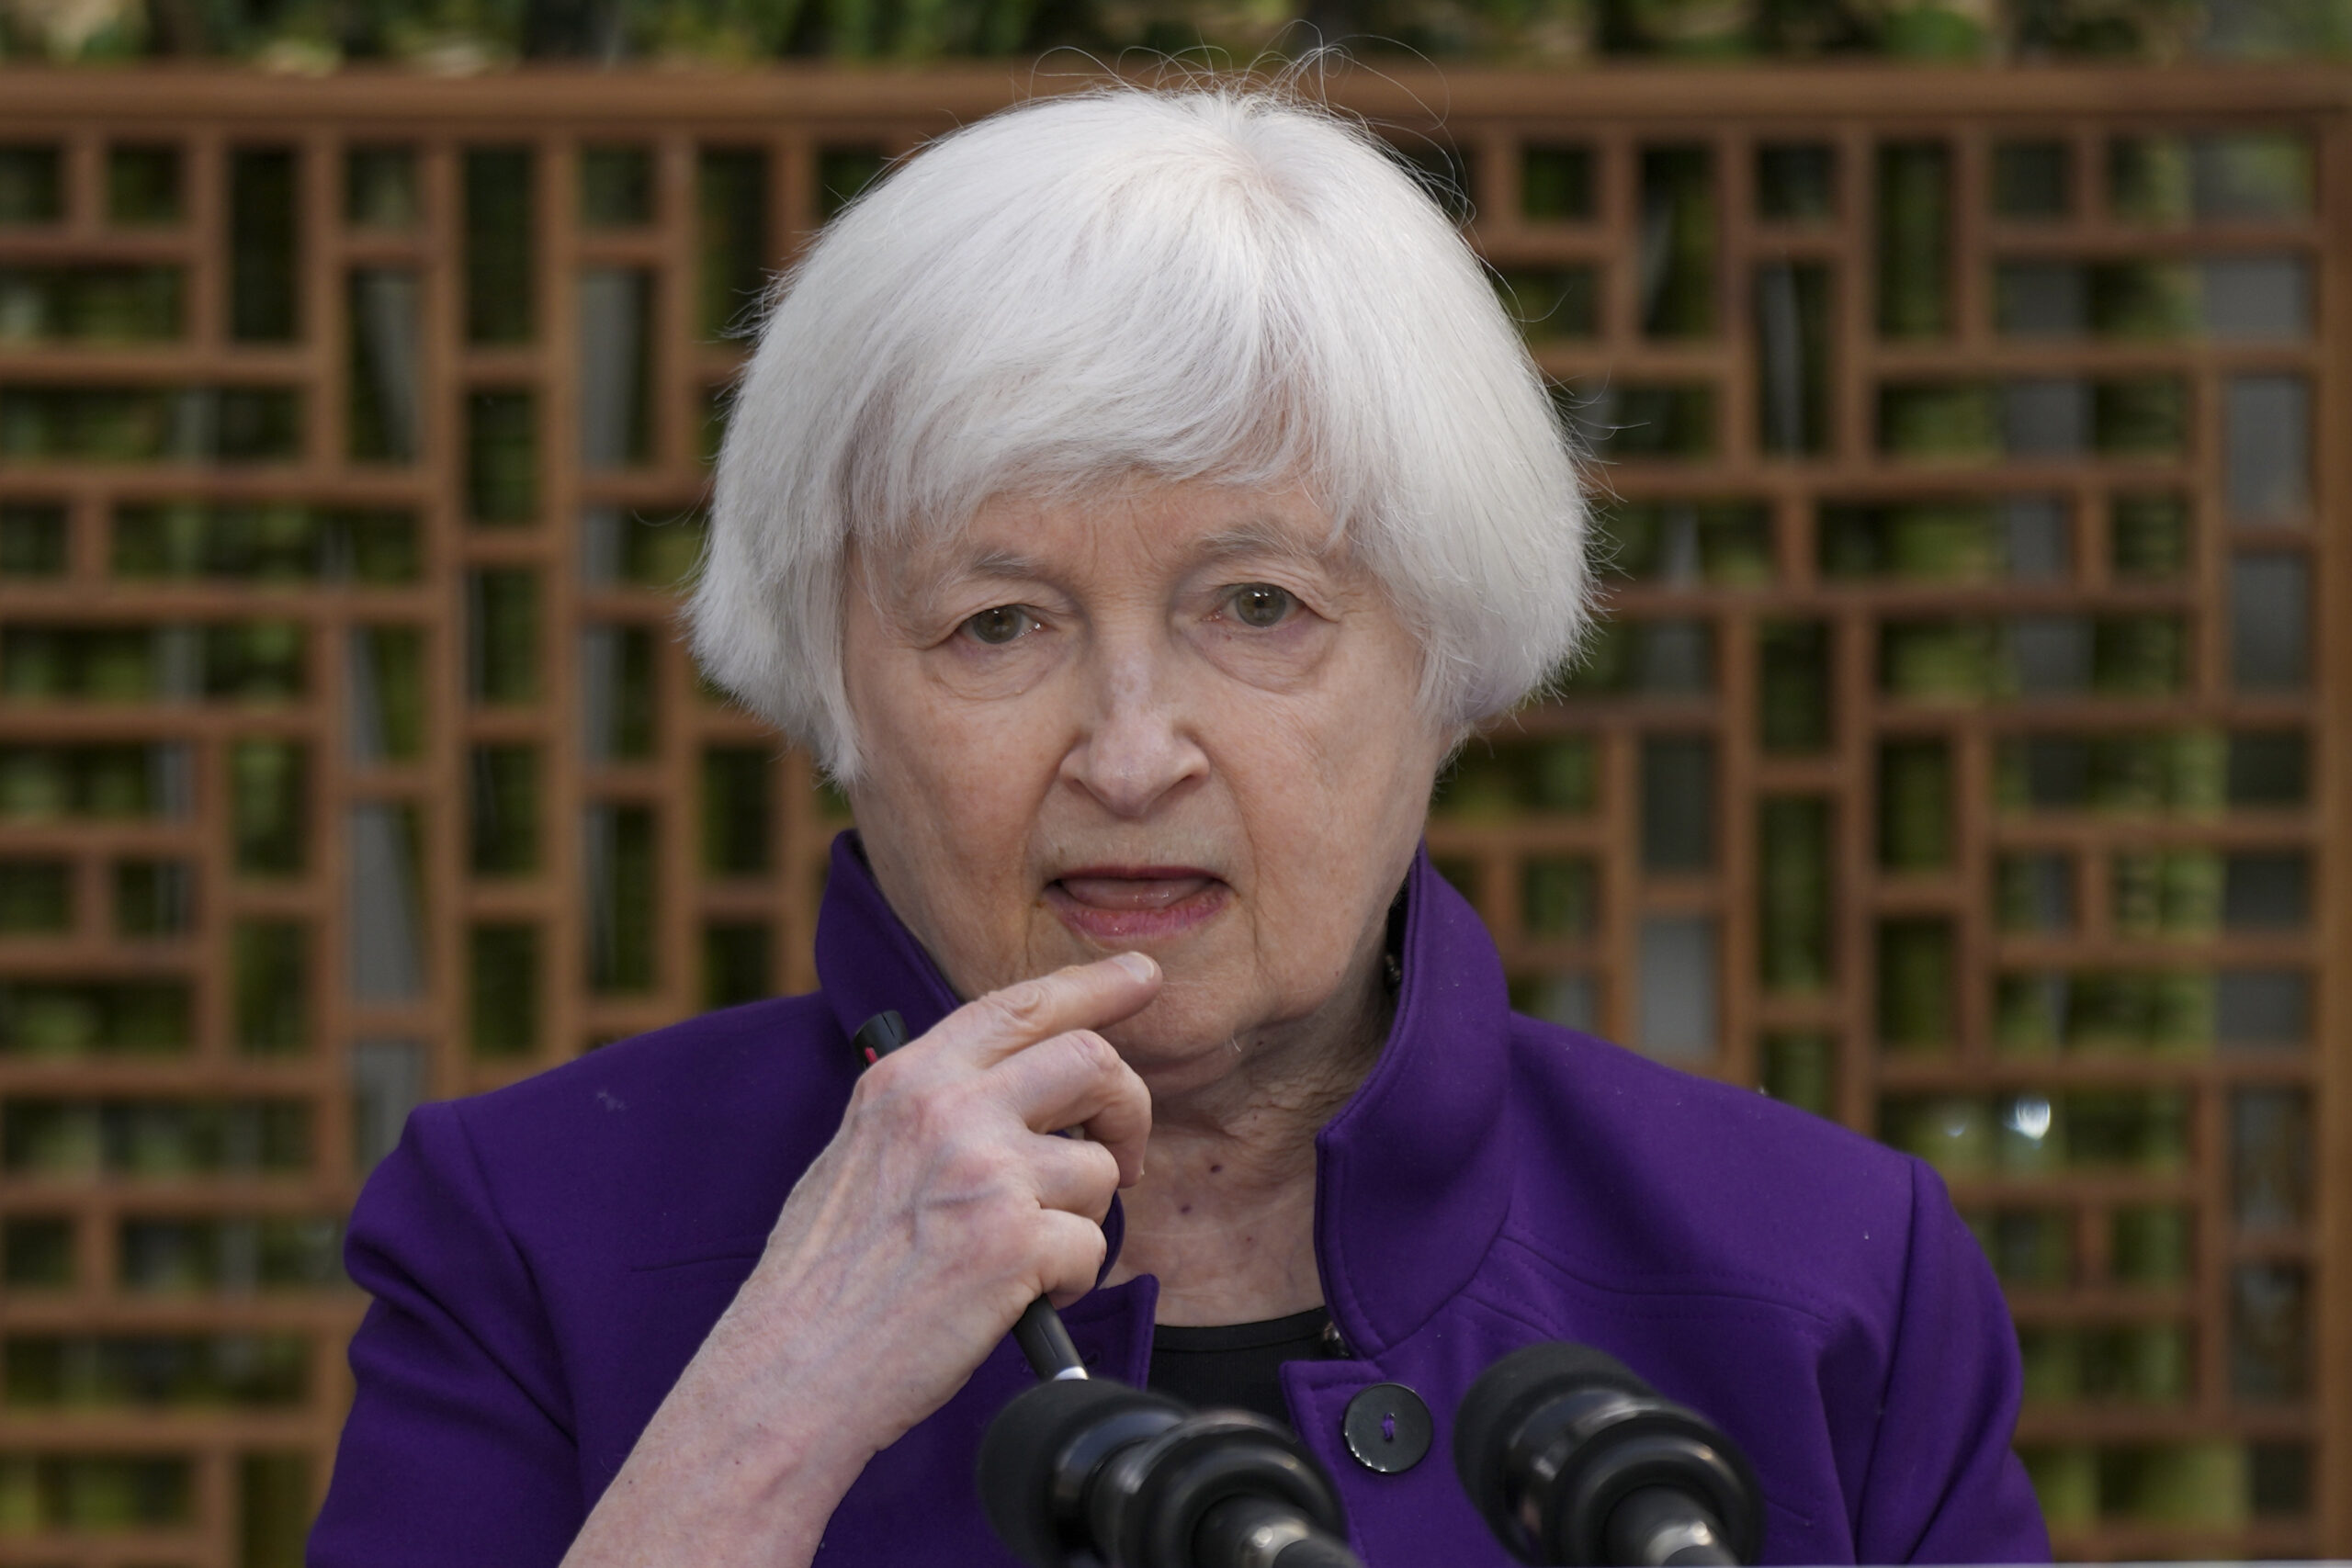 yellen says iran’s actions could cause global ‘economic spillovers’